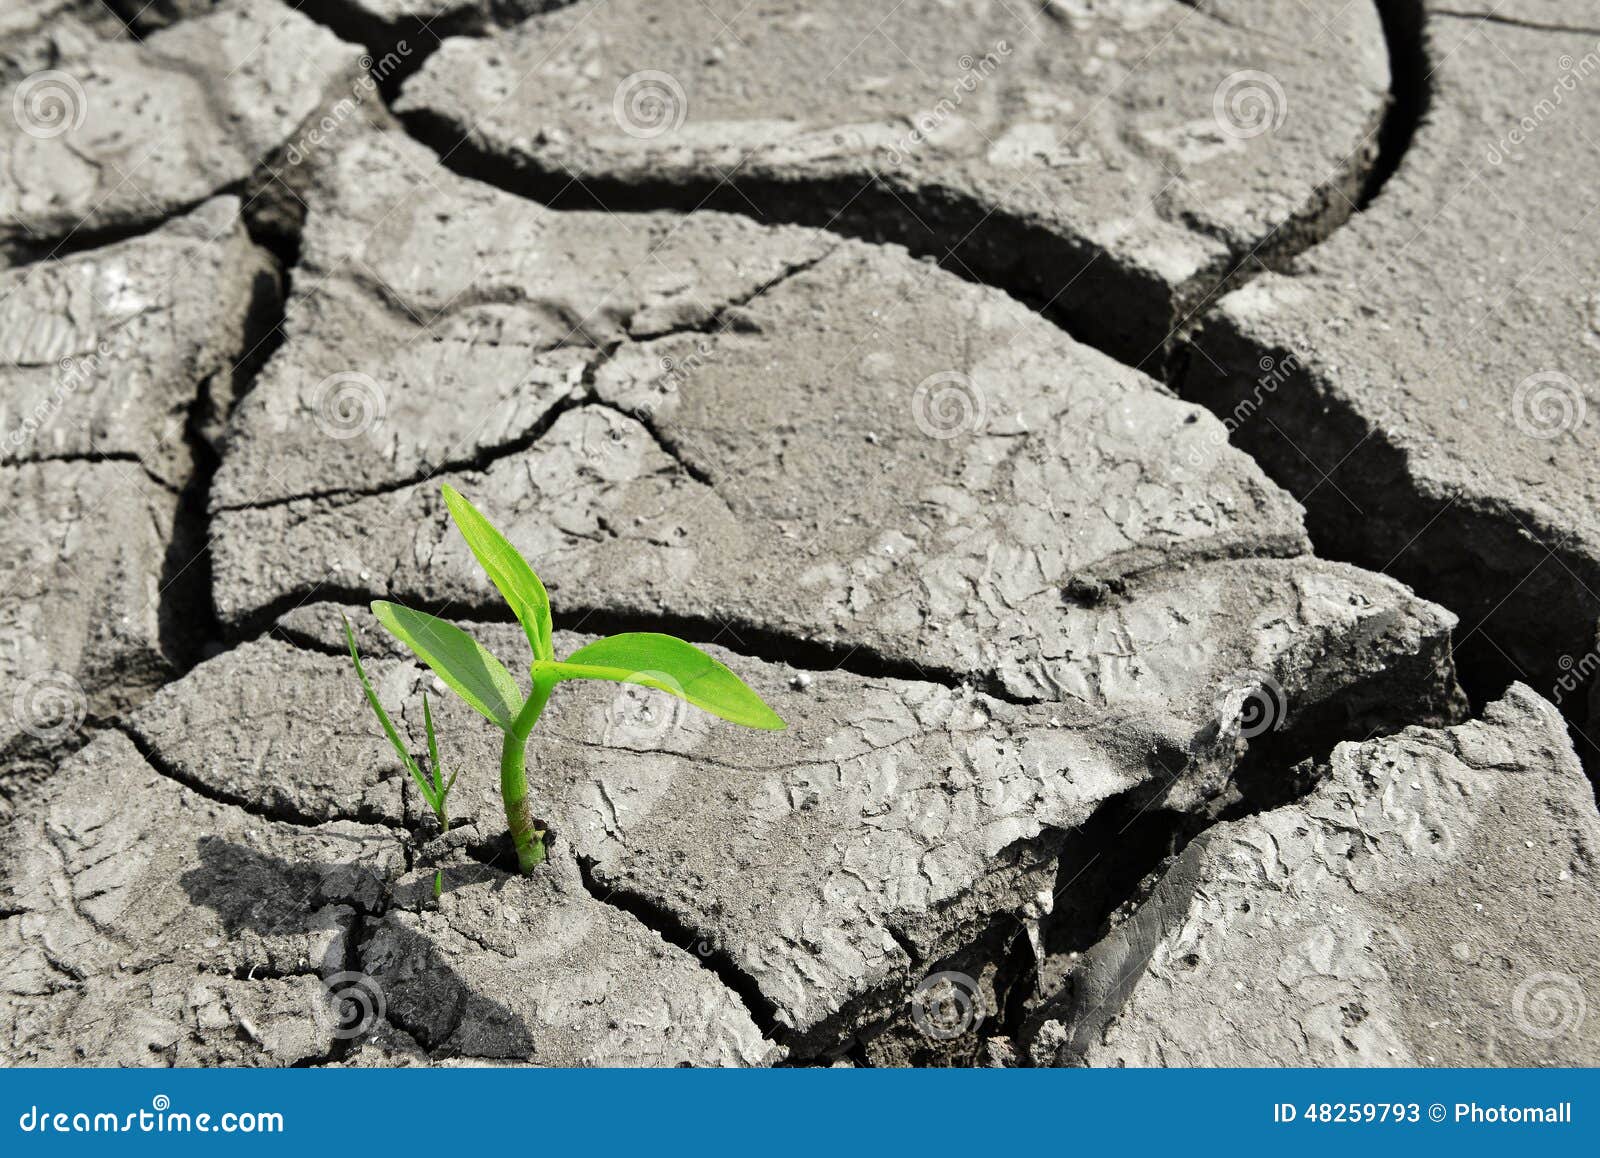 dry cracked land green shoot,pollution land adversity heal the world new hope life protect environment